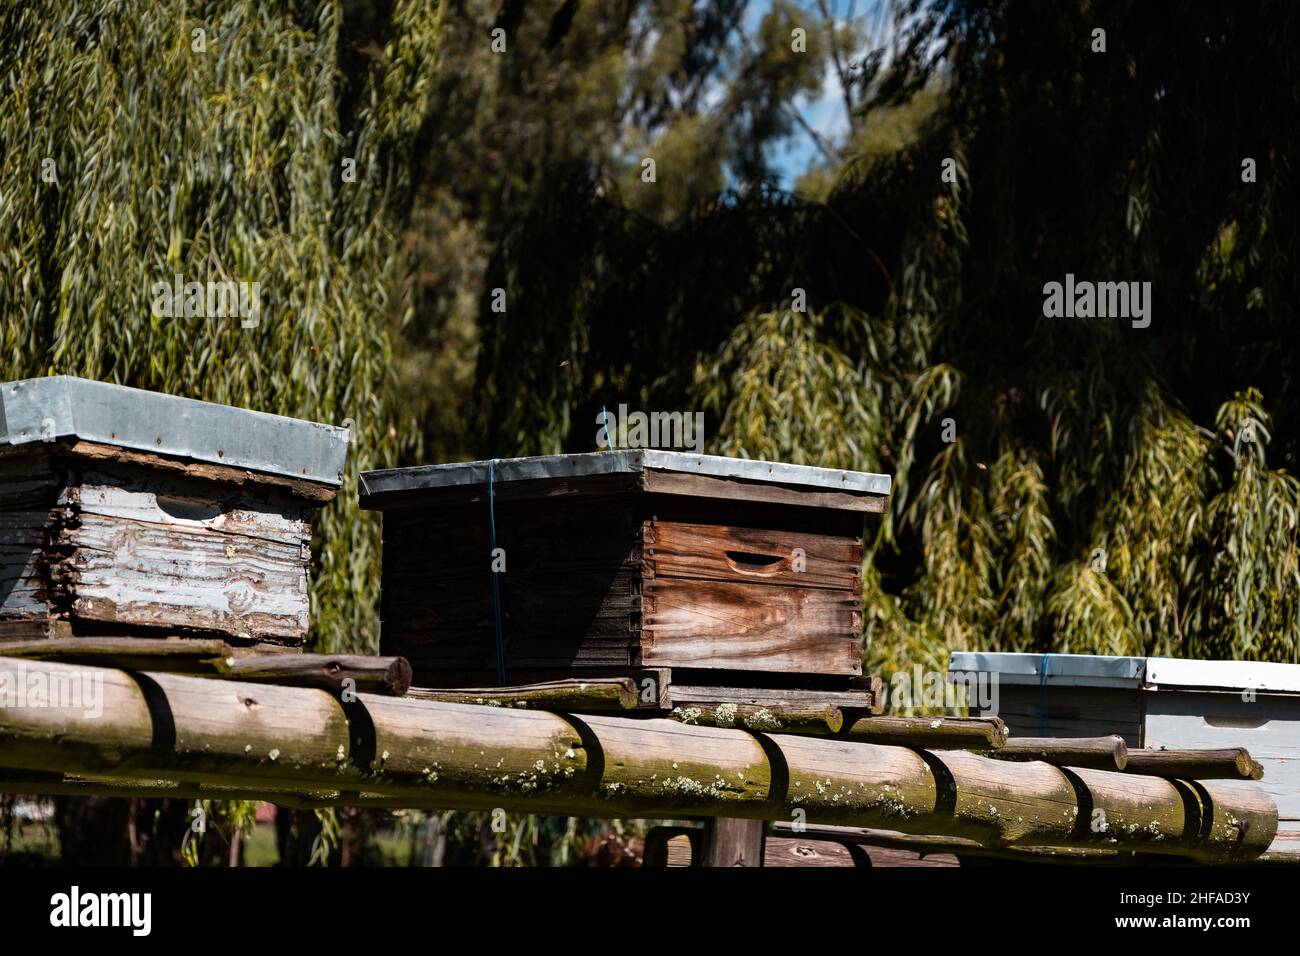 Honeybees flying in front off their wooden hive. Stock Photo